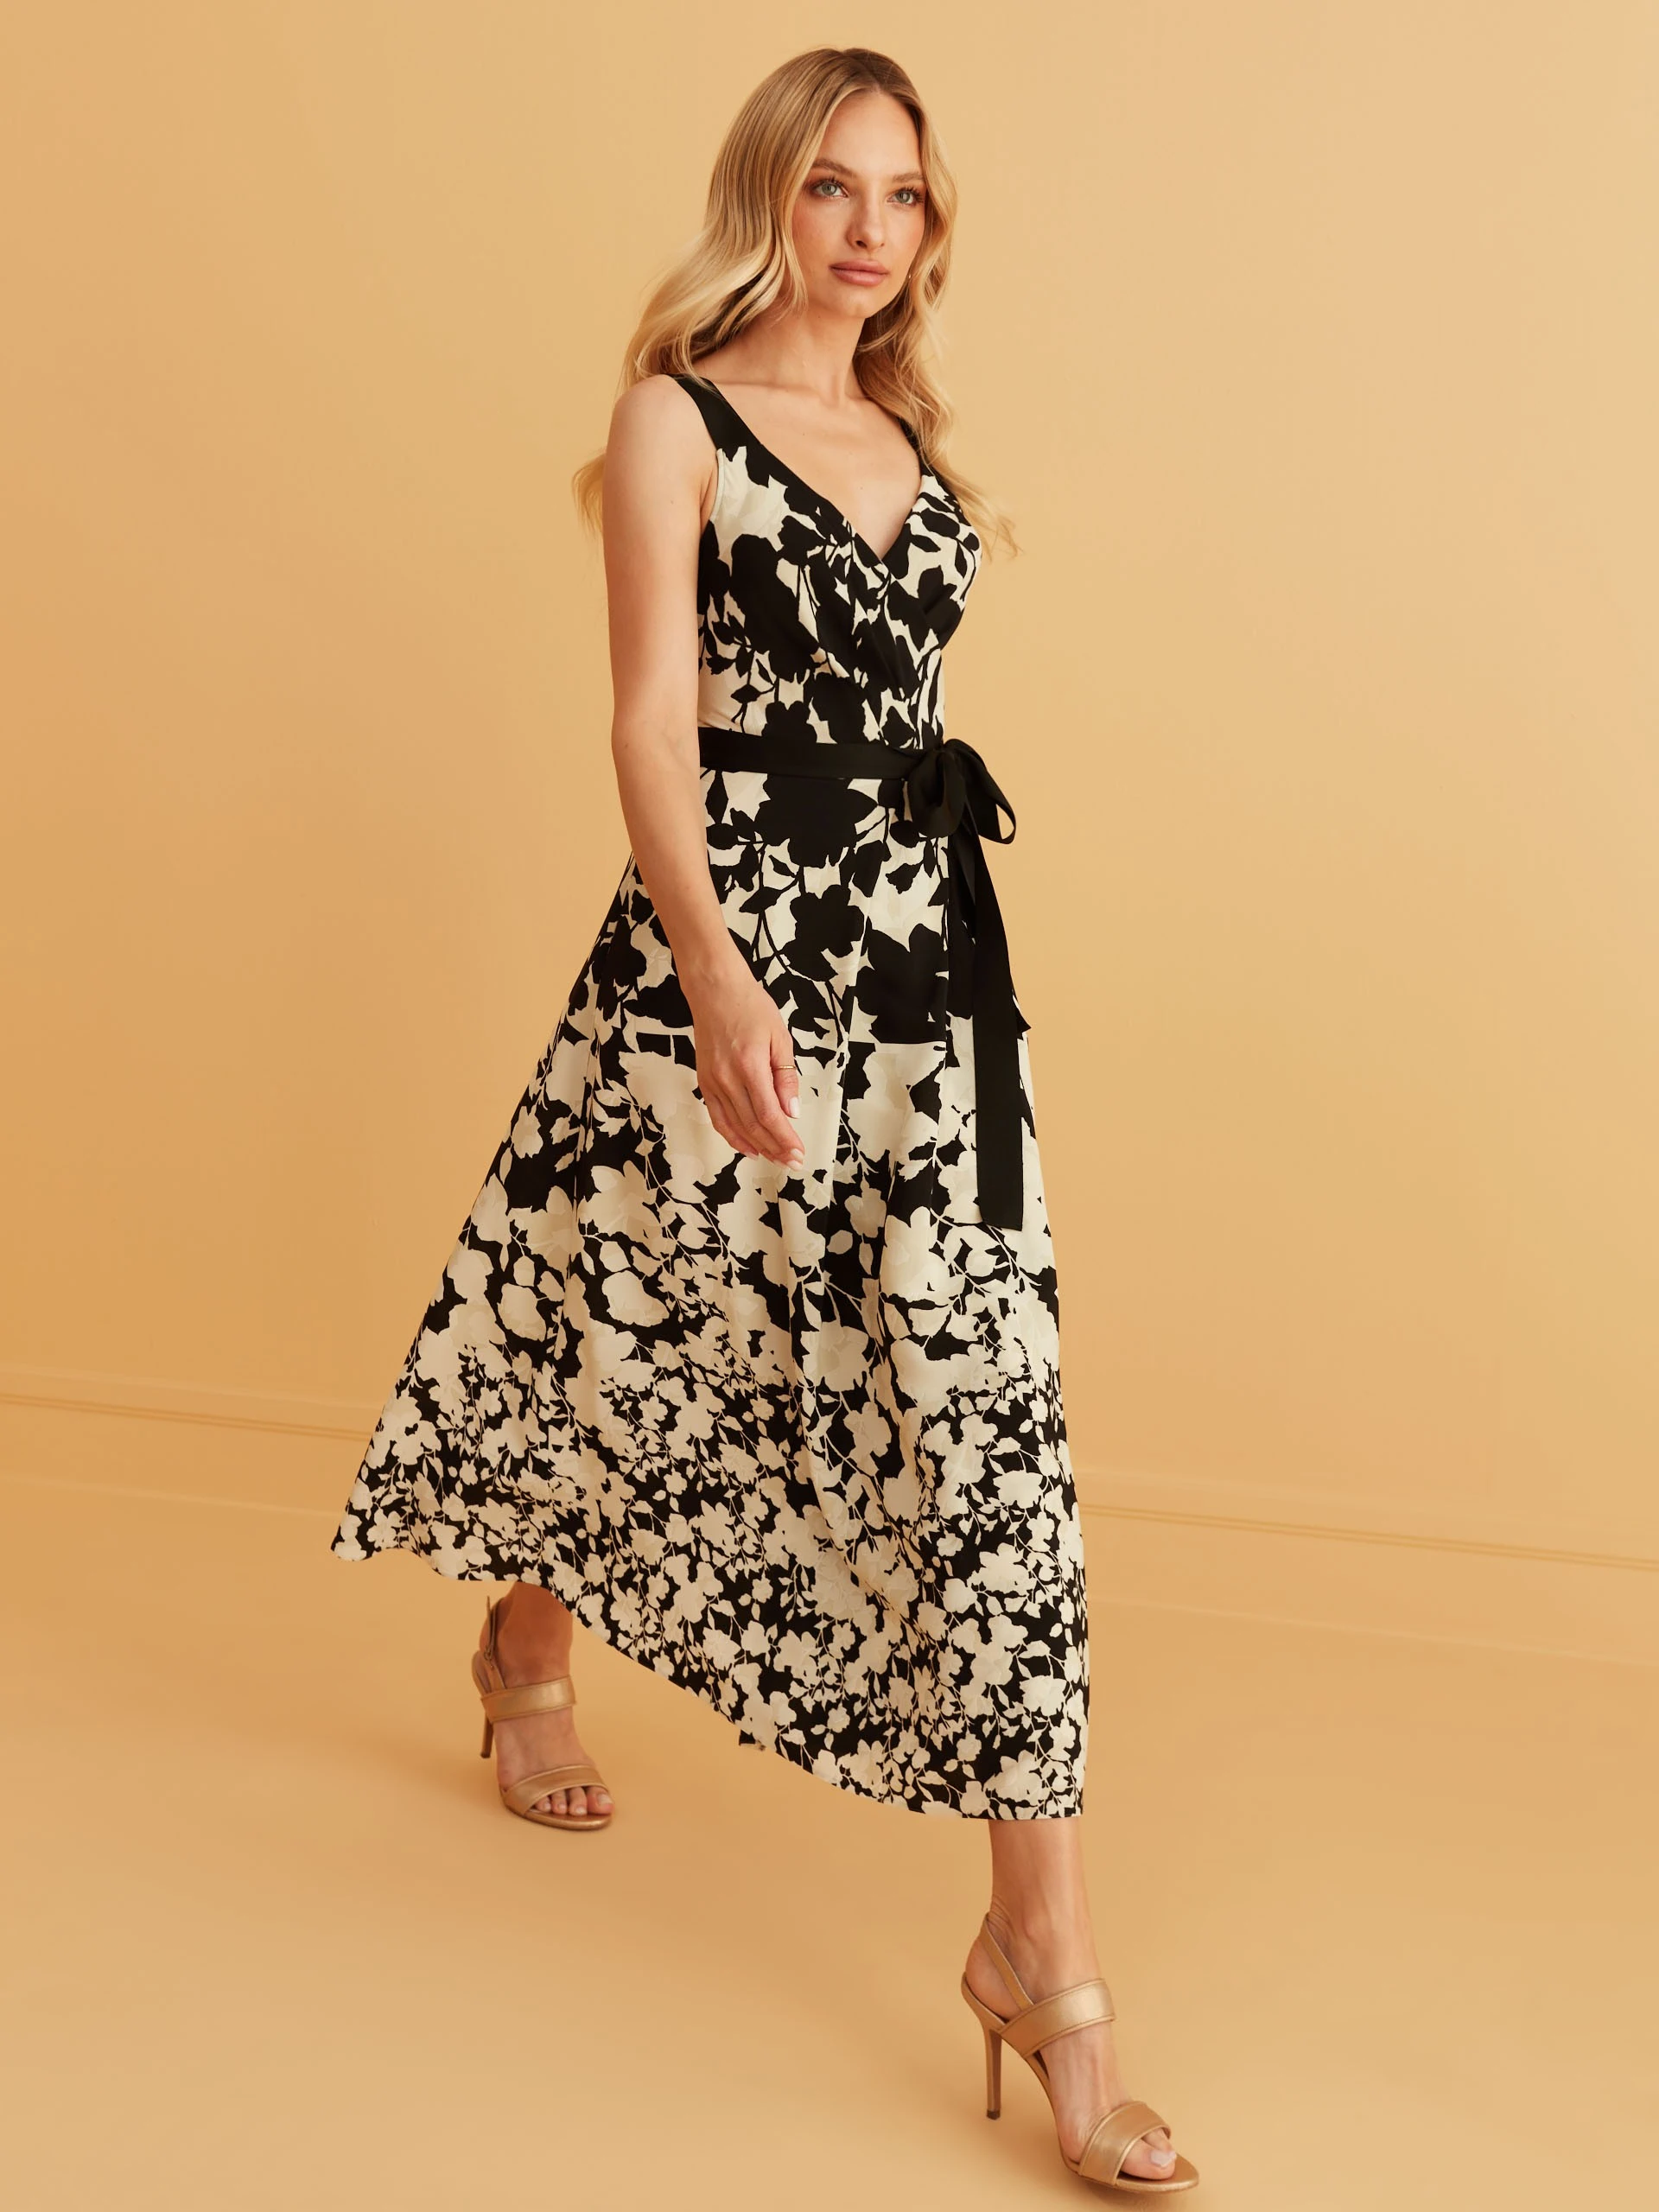 MIDI DRESS WITH BLACK AND WHITE PATTERN